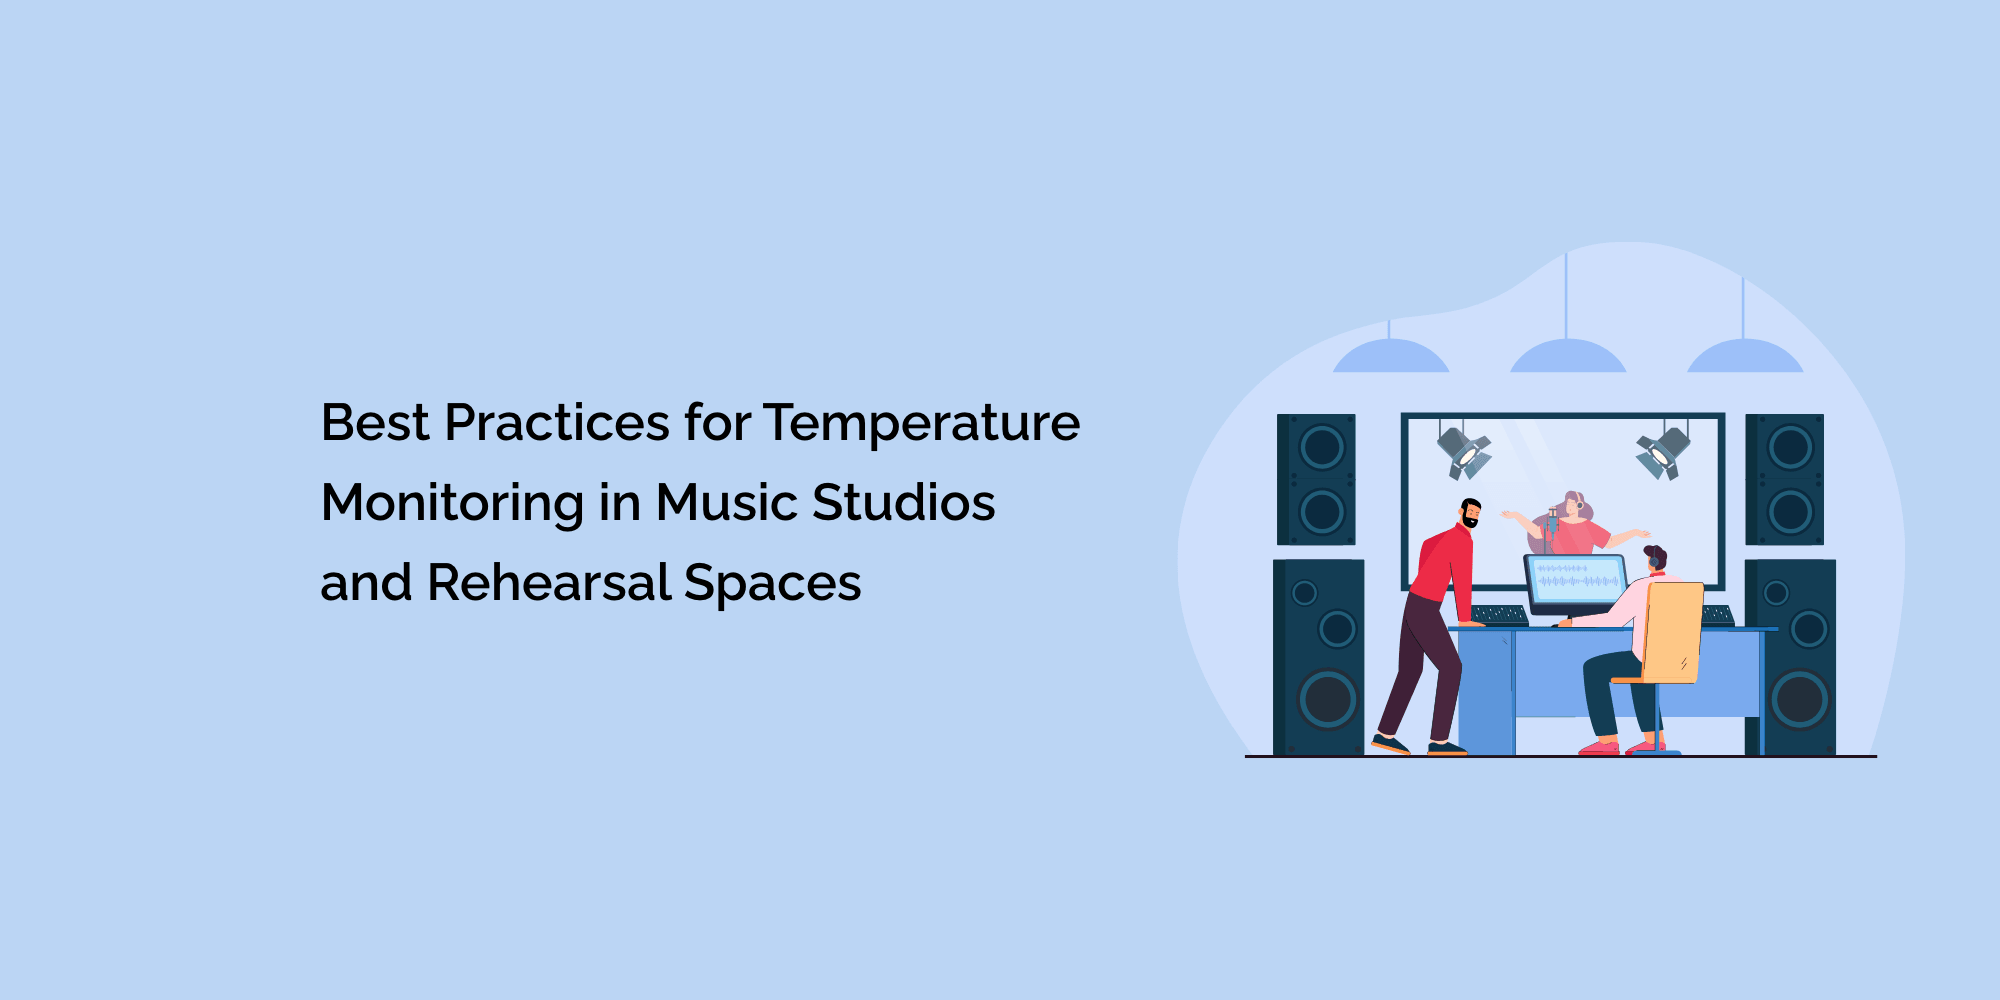 Best Practices for Temperature Monitoring in Music Studios and Rehearsal Spaces